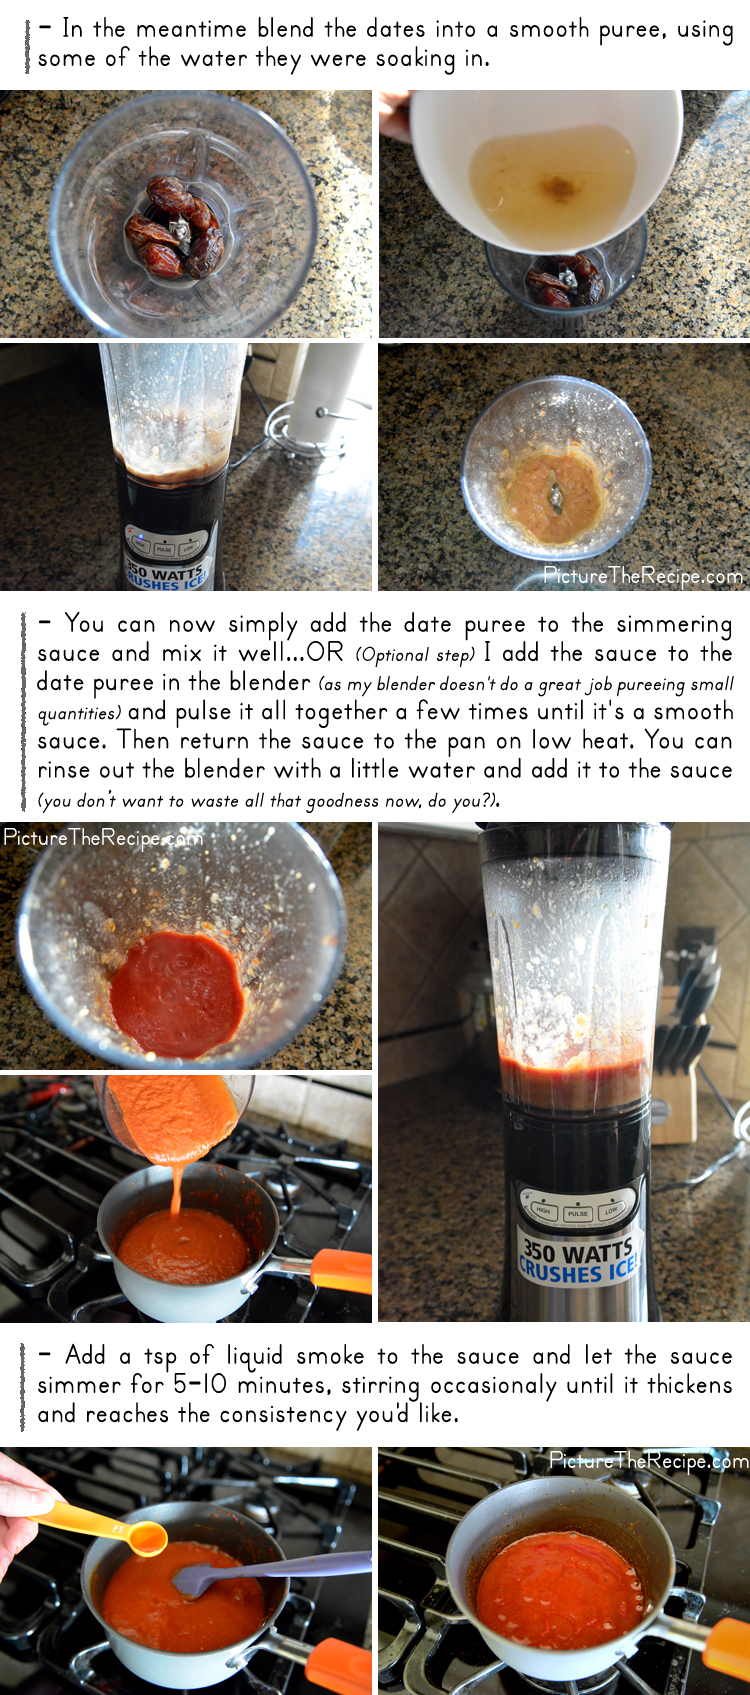 Sweet and Spicy BBQ Sauce- Whole30 Paleo - Recipe - Part 2 (PictureTheRecipe)